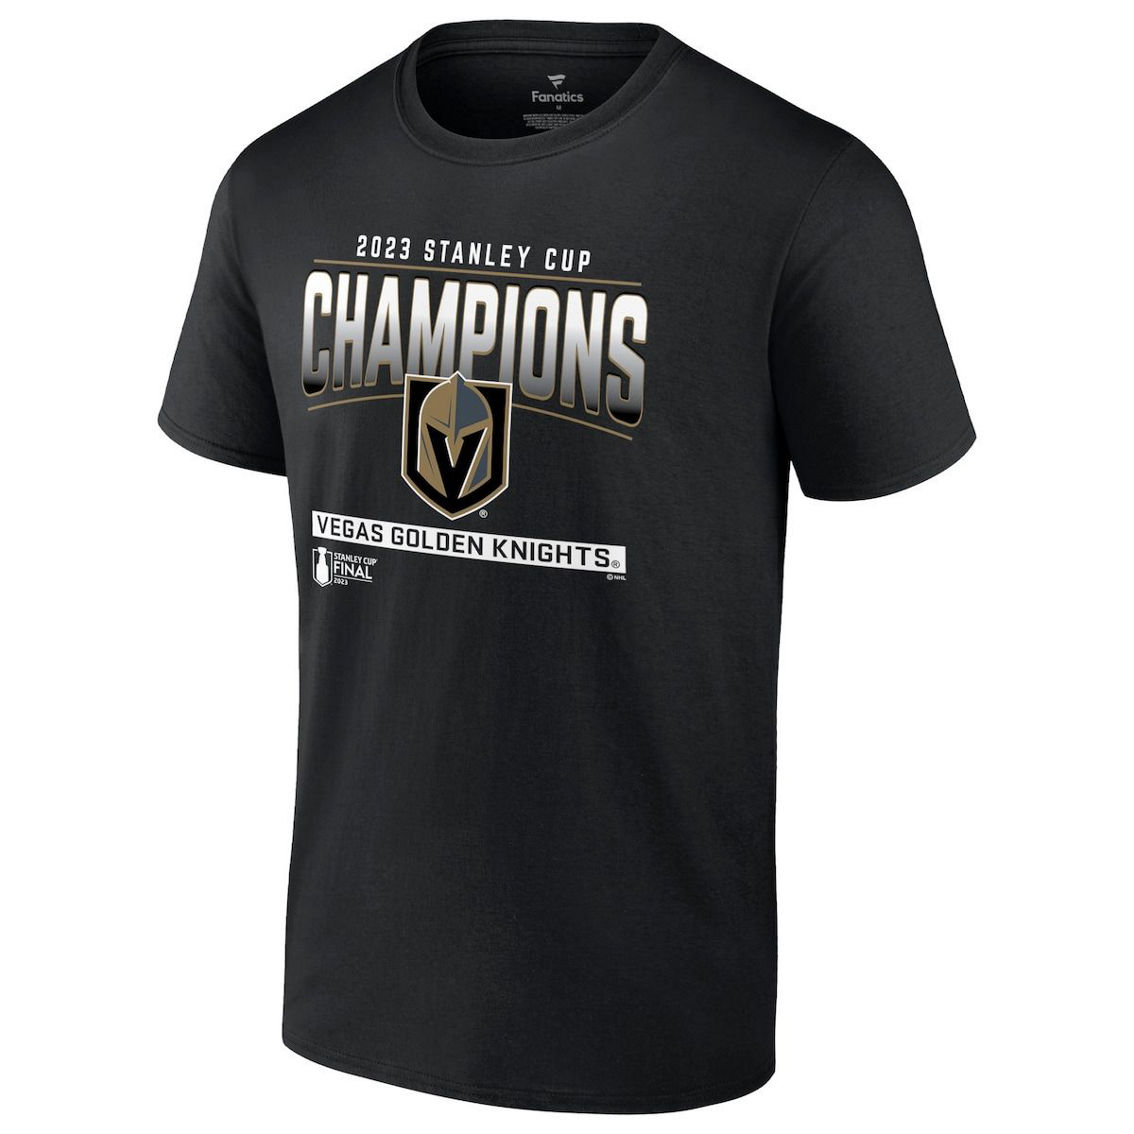 Fanatics Branded Men's Black Vegas Golden Knights 2023 Stanley Cup s Signature Roster T-Shirt - Image 3 of 4